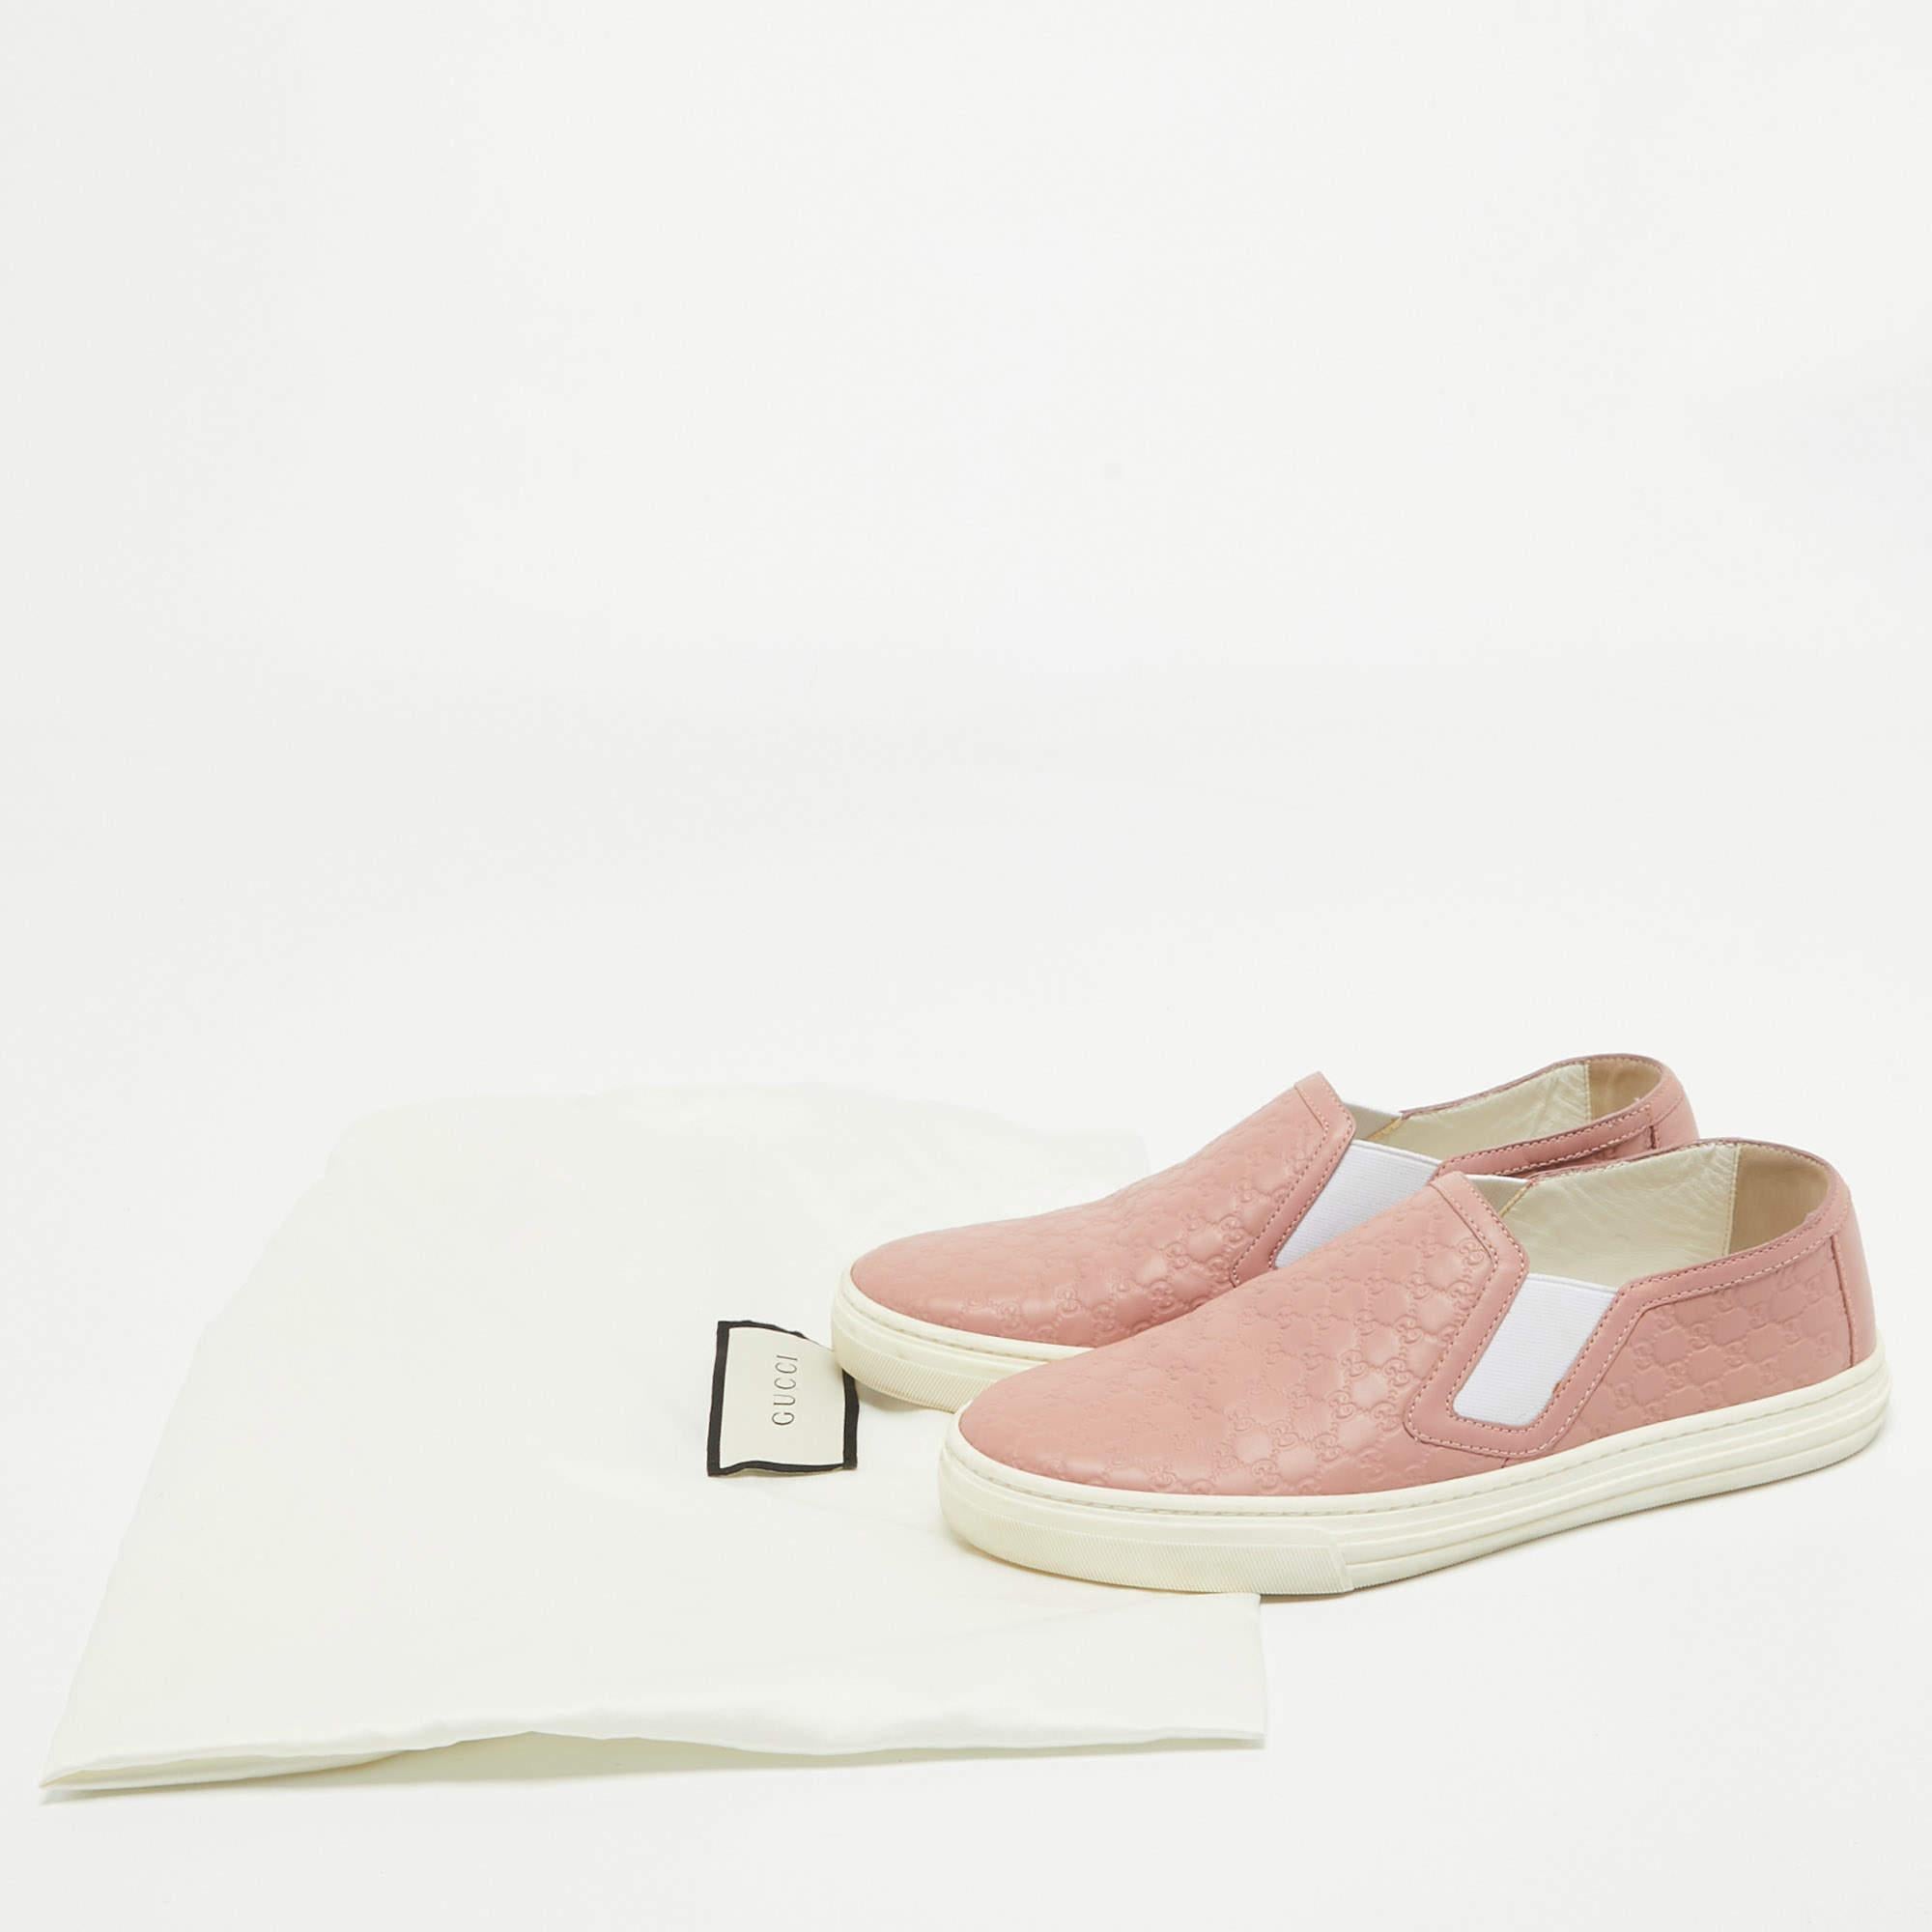 Gucci Pink Microguccissima Leather Slip On Sneakers Size 35.5 For Sale 2